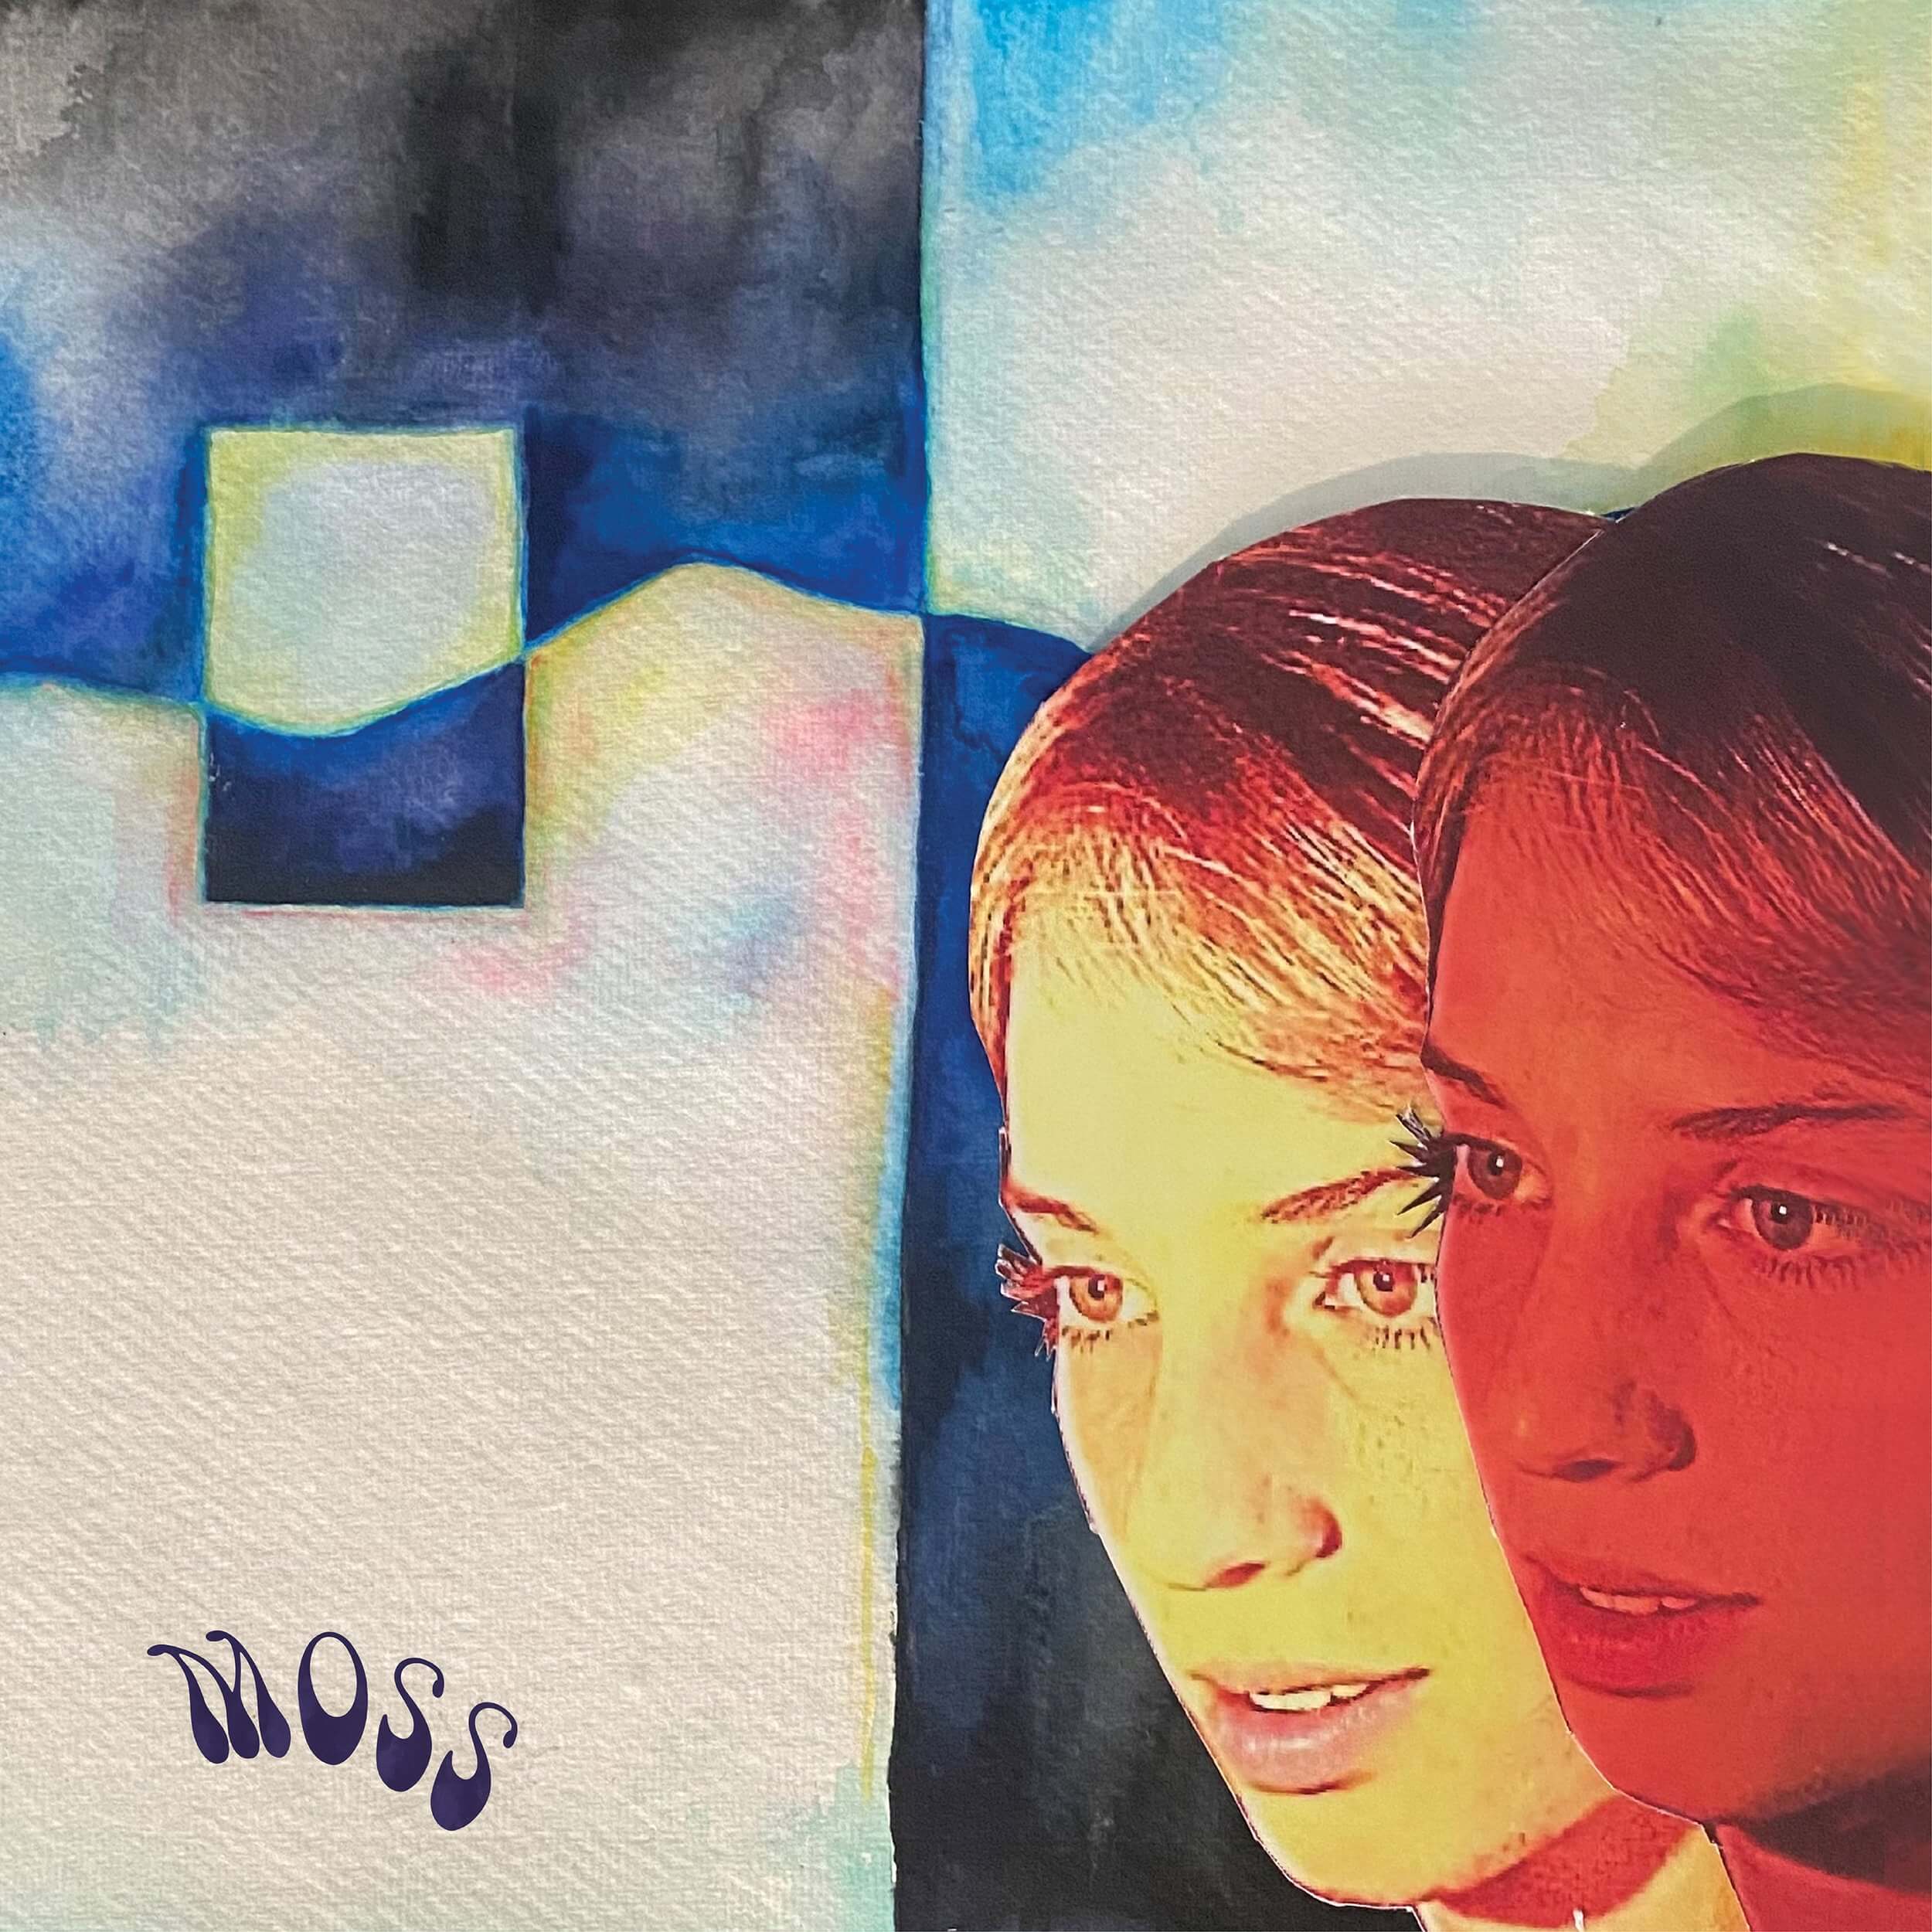 Moss by Maya Hawke album review by Adam Fink for Northern Transmissions